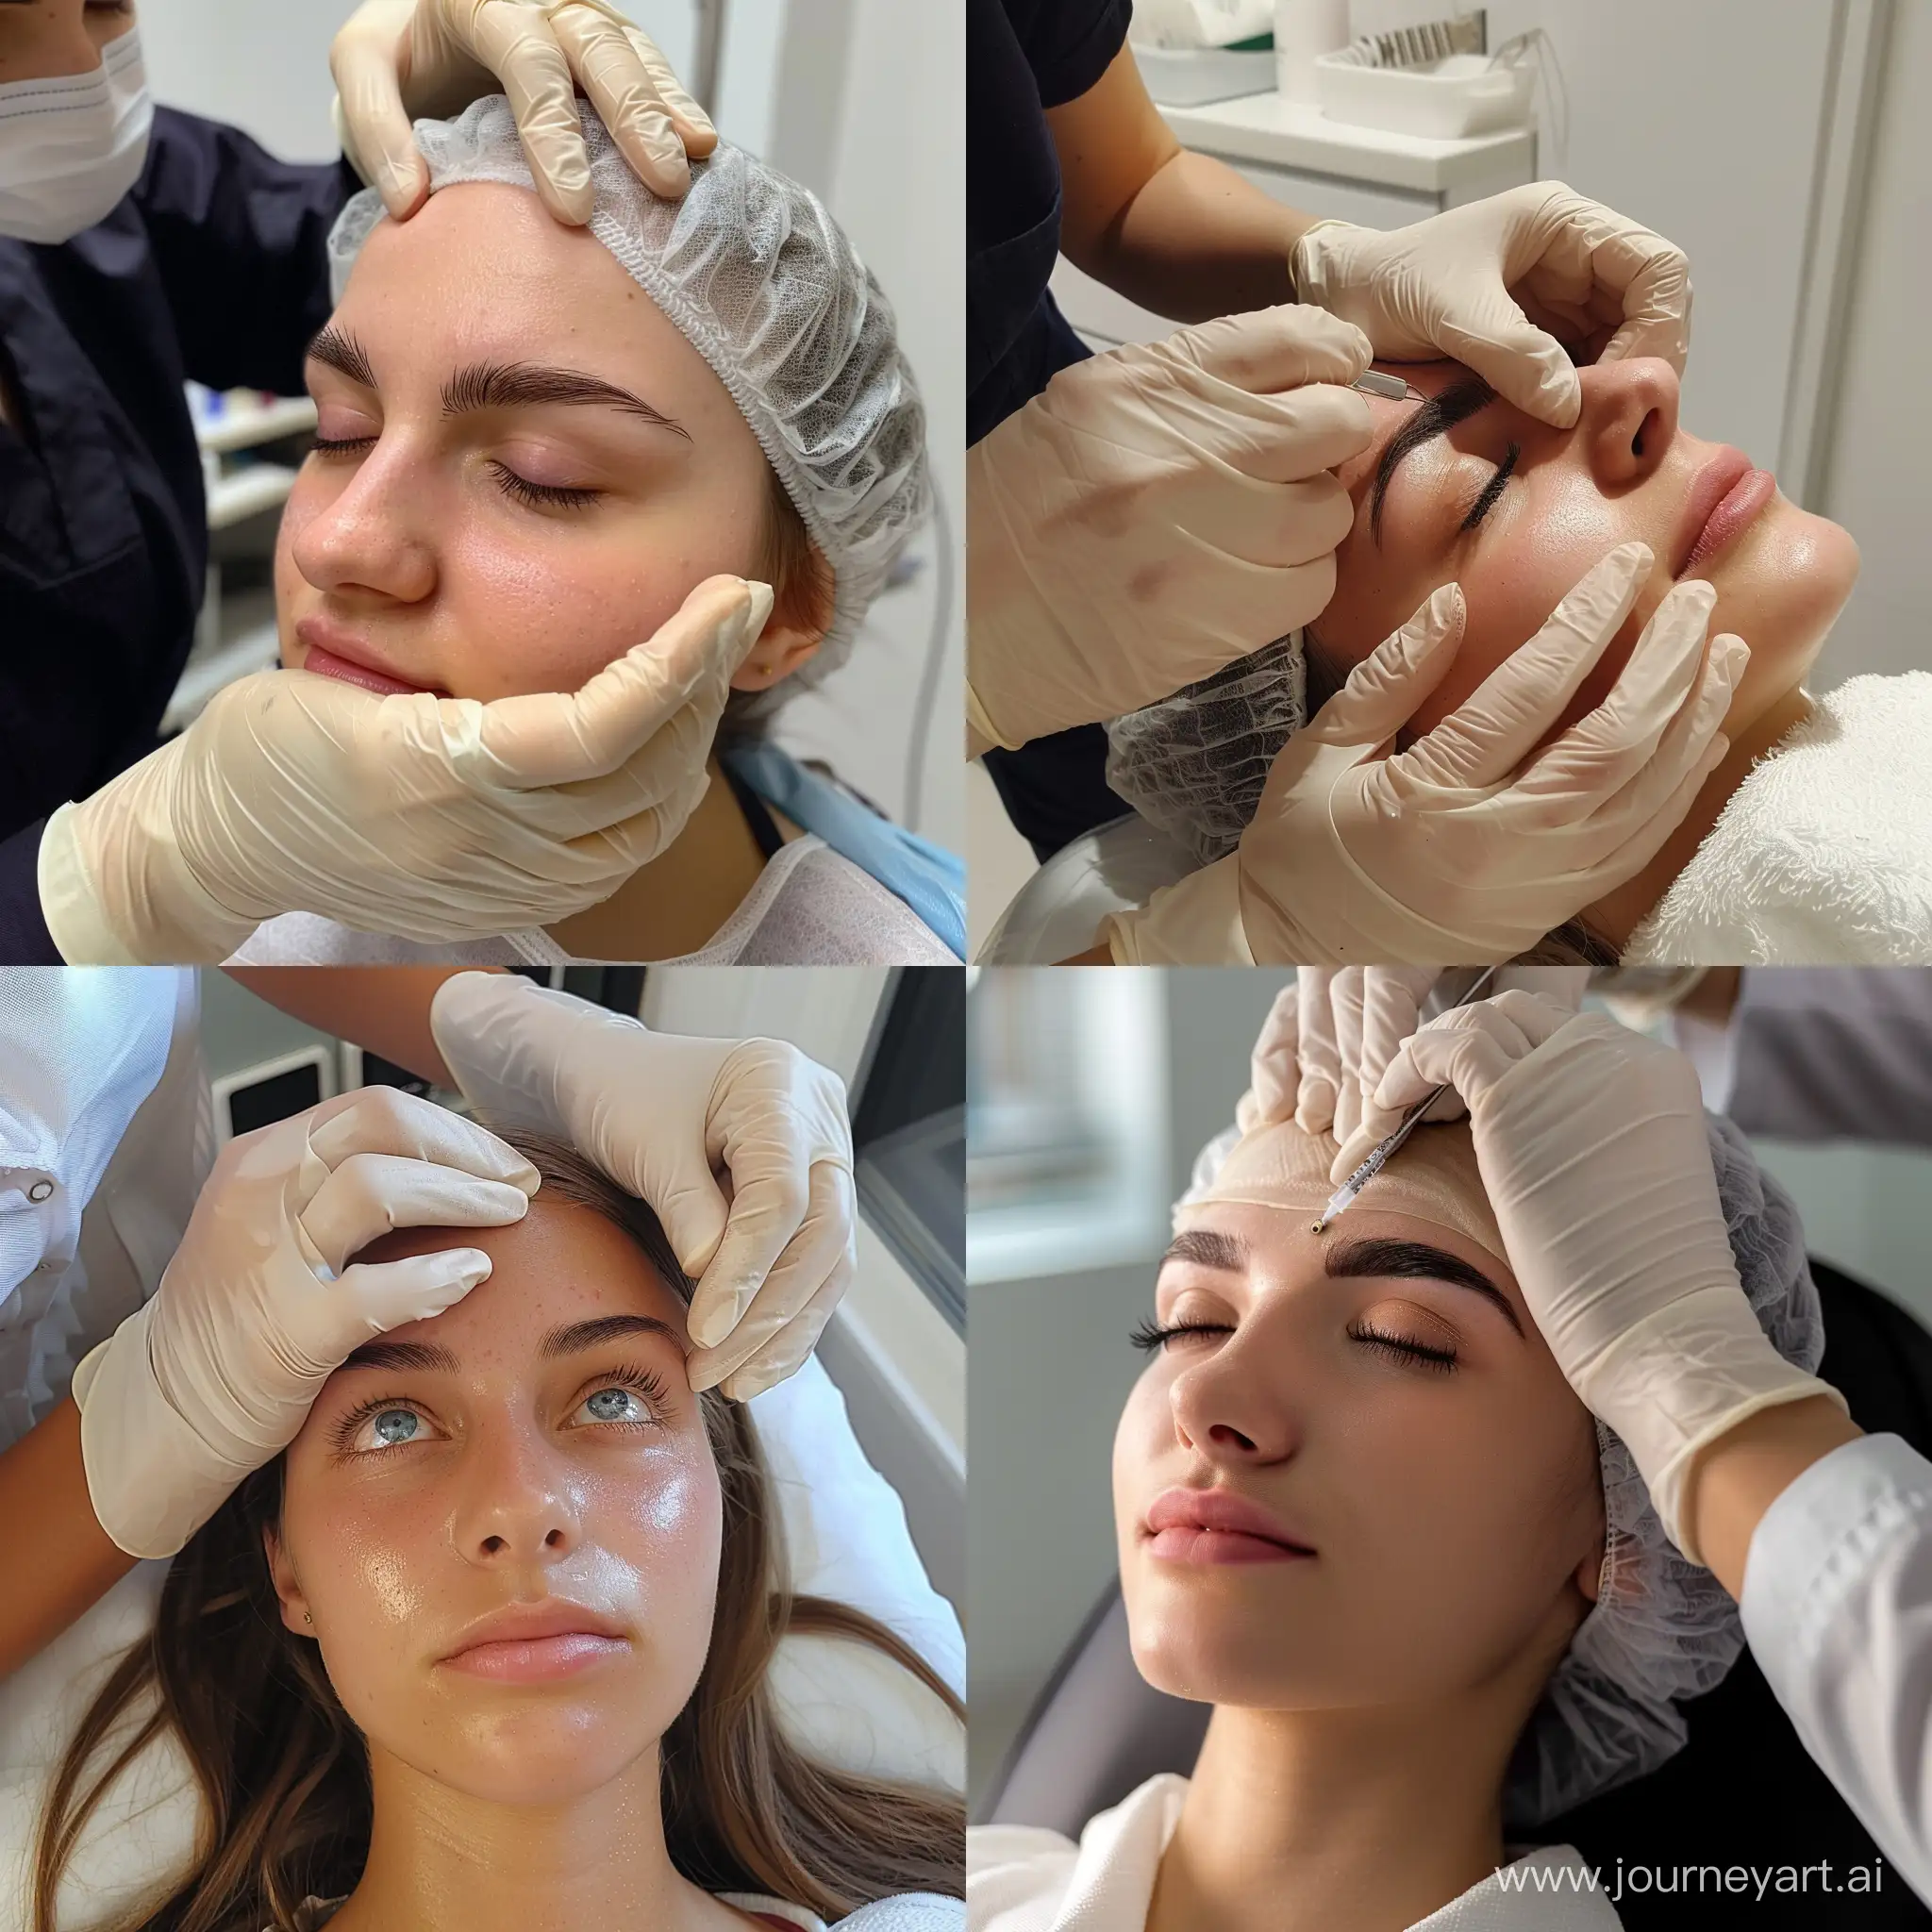 Youthful-Transformation-Girl-Undergoing-Eyebrow-Lift-Procedure-in-Clinic